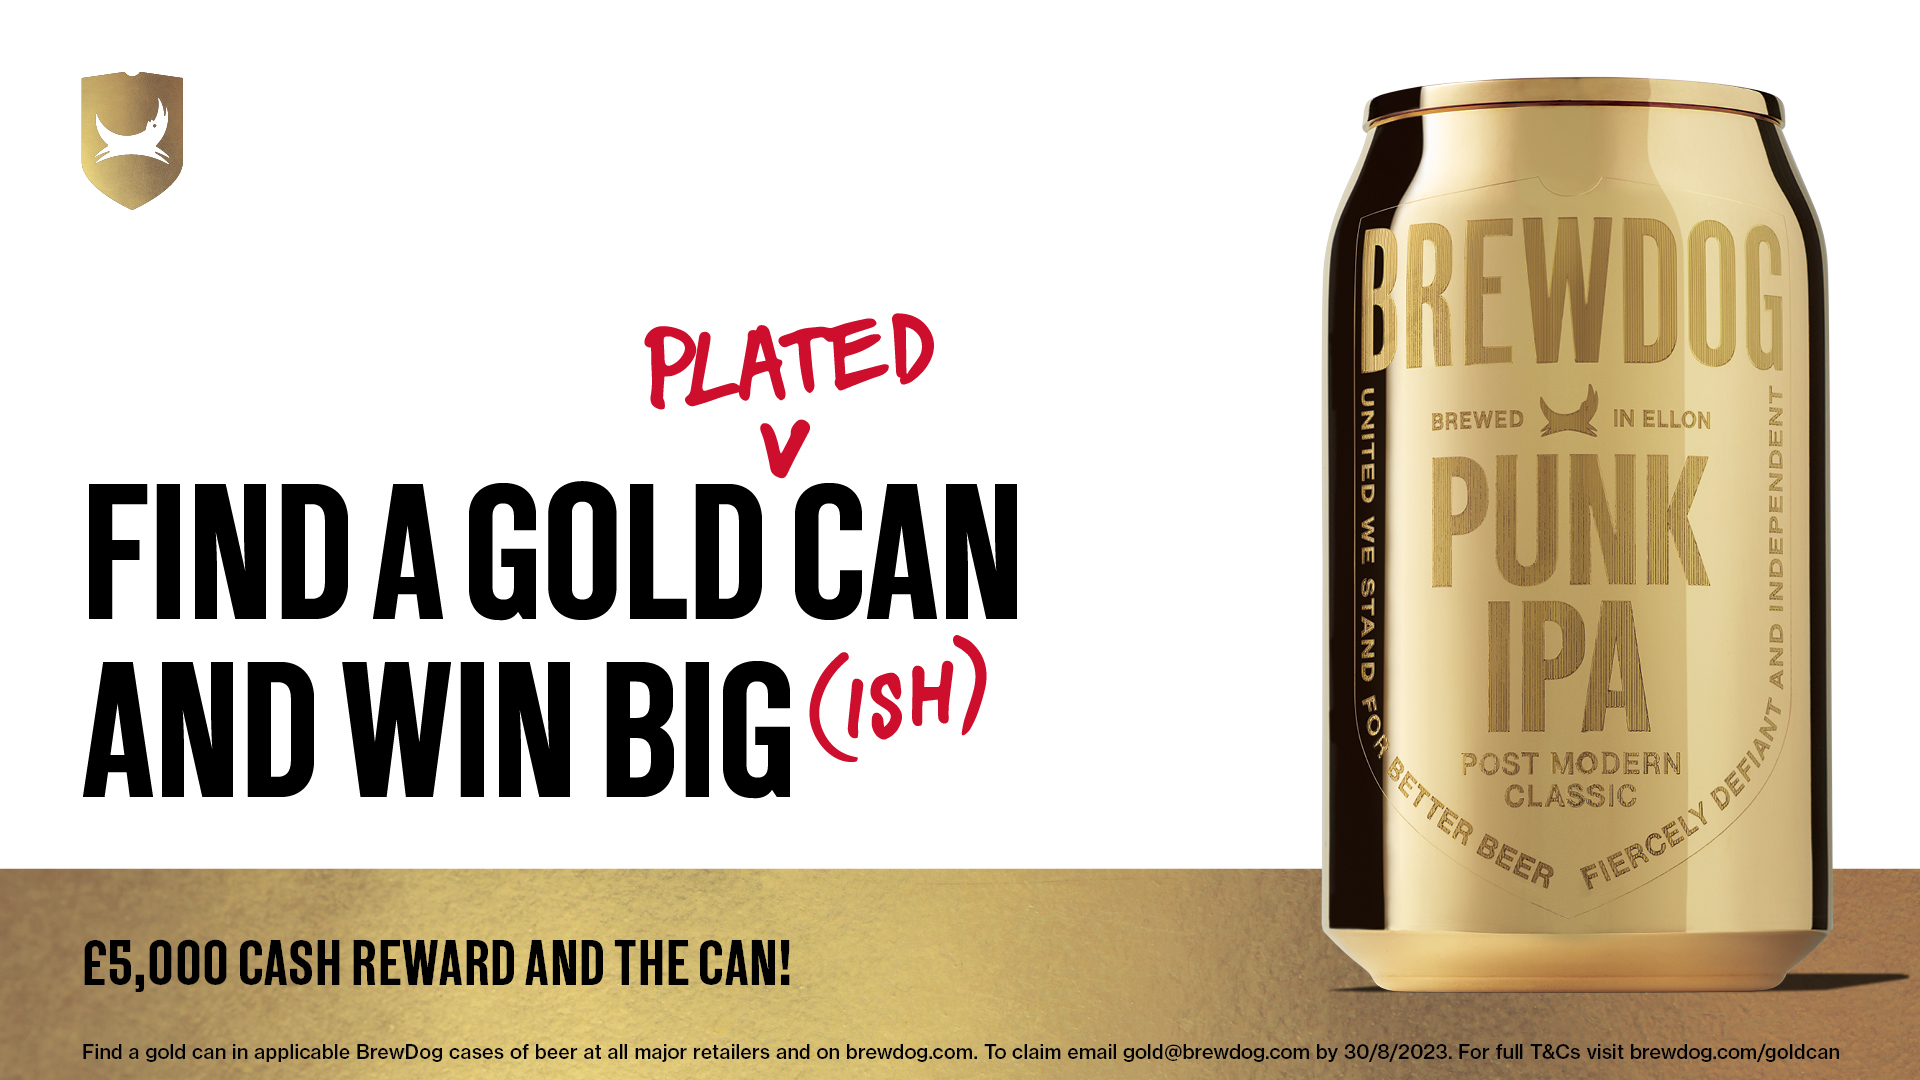 Going for gold: BrewDog announces gold can hunt is back…